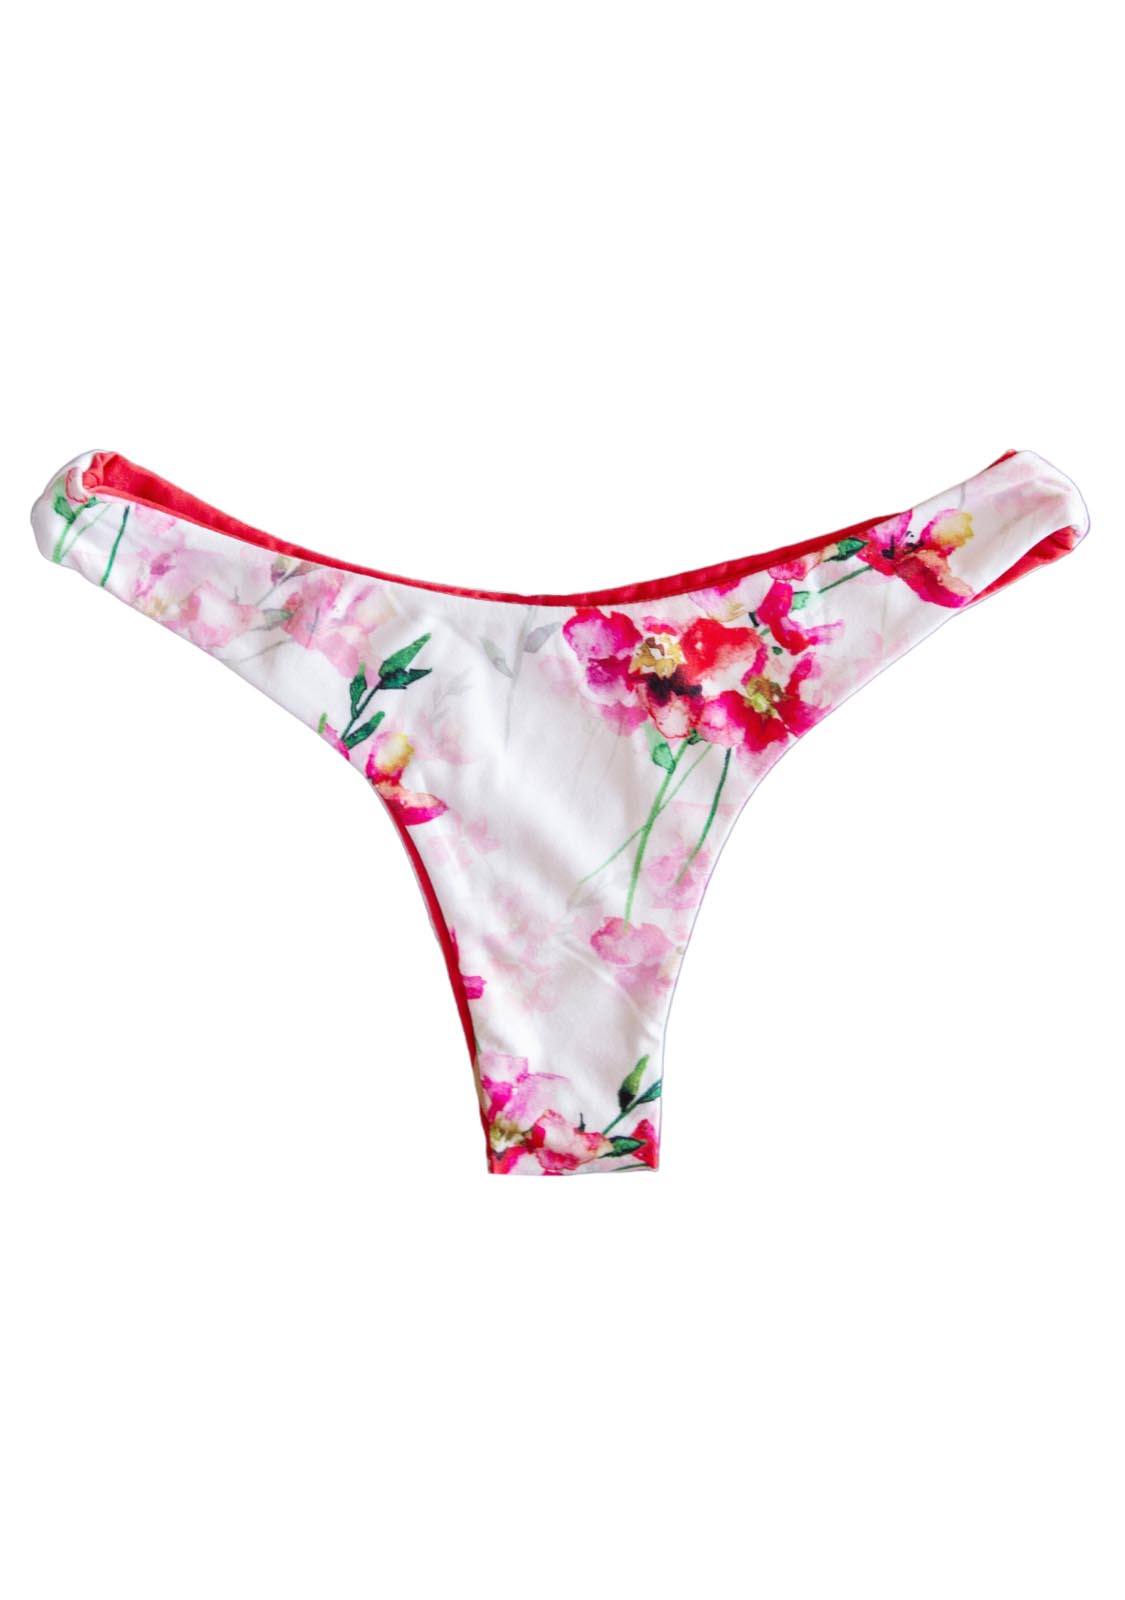 Cheeky swim floral red Reversible bottoms Sustainable Eco Fabric